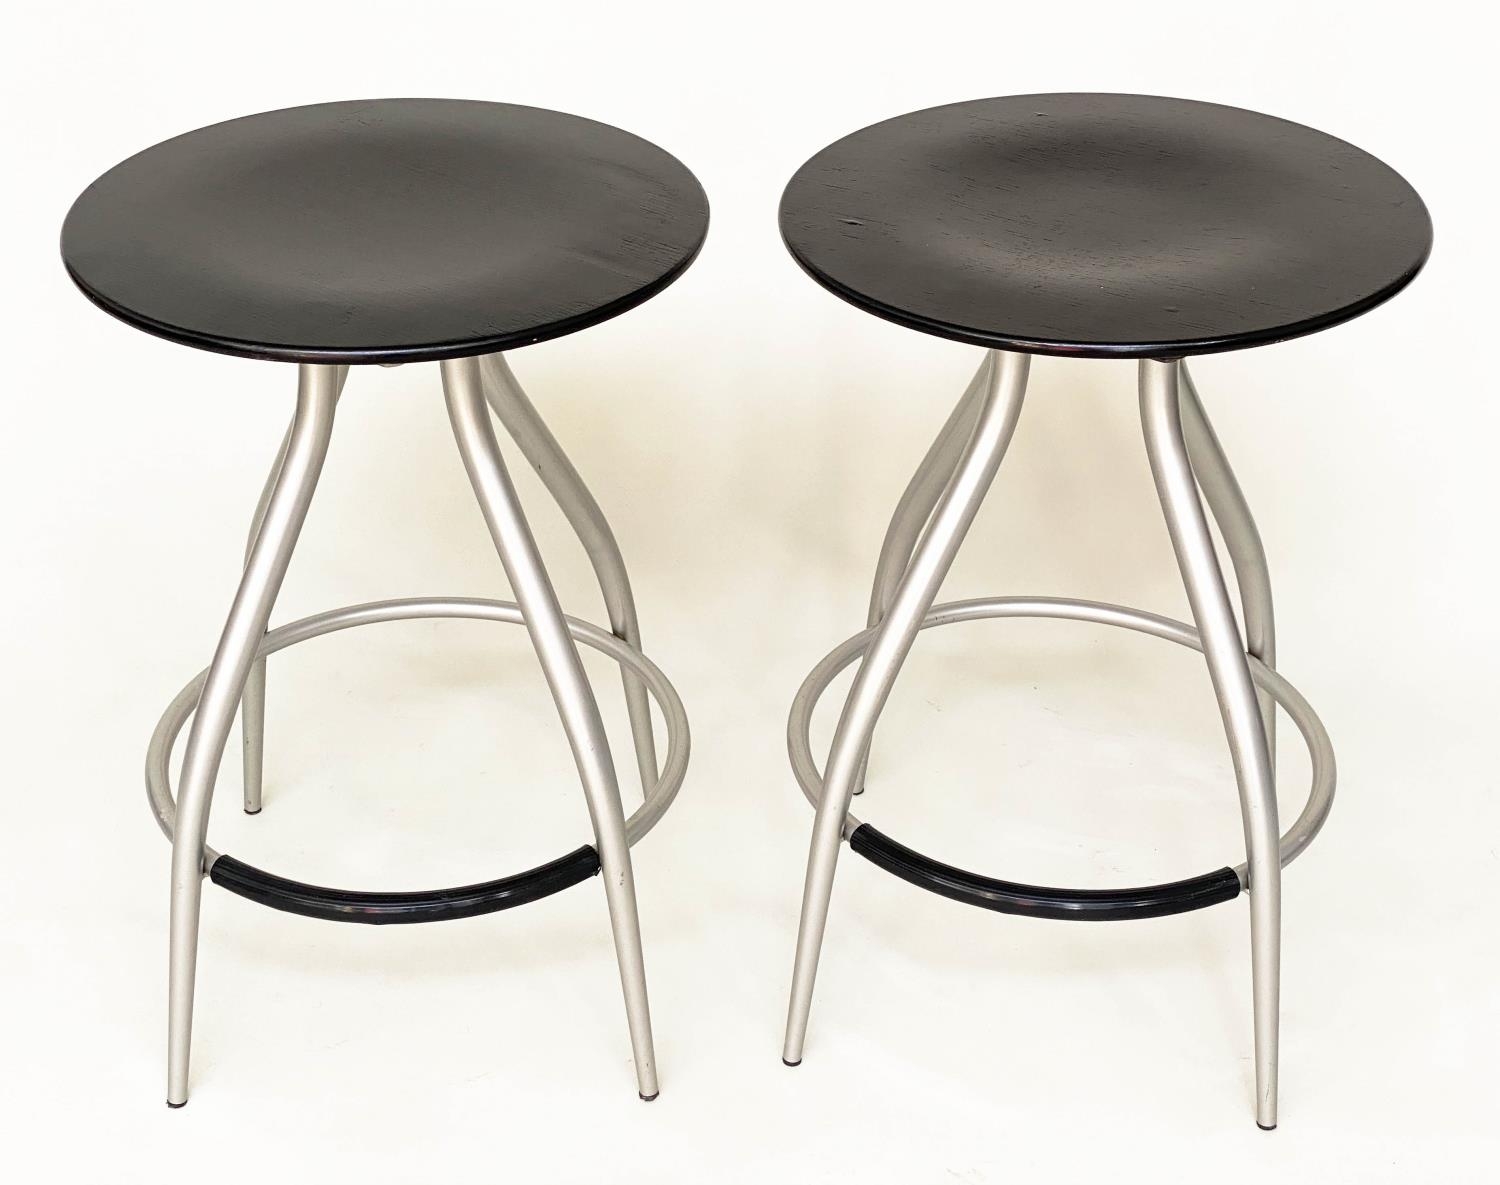 CALLIGARIS BAR STOOLS, a pair, 60cm x 41cm diam., circular ash seat and metal framed, with footrest.